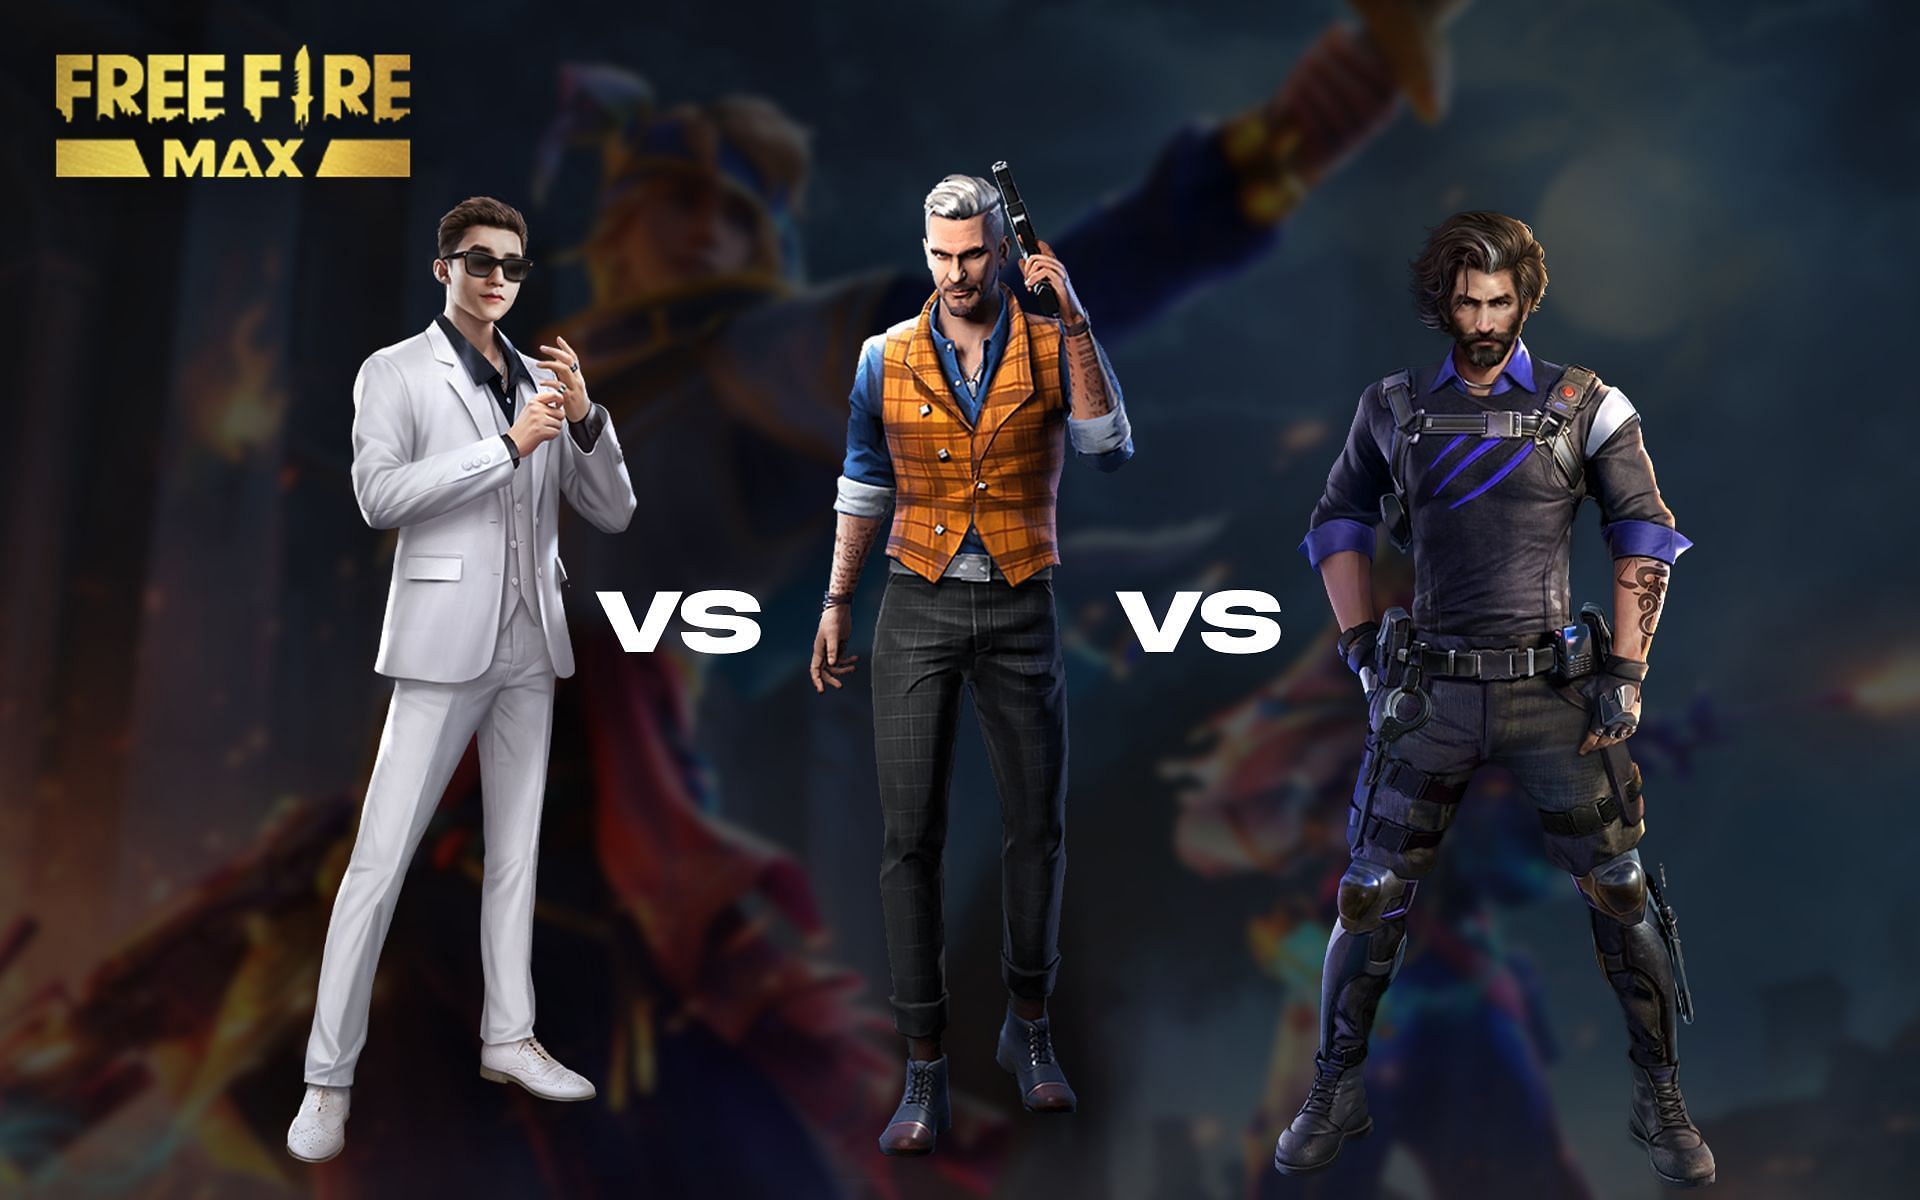 These characters are well suited for a rank push in Free Fire MAX (Image via Sportskeeda)